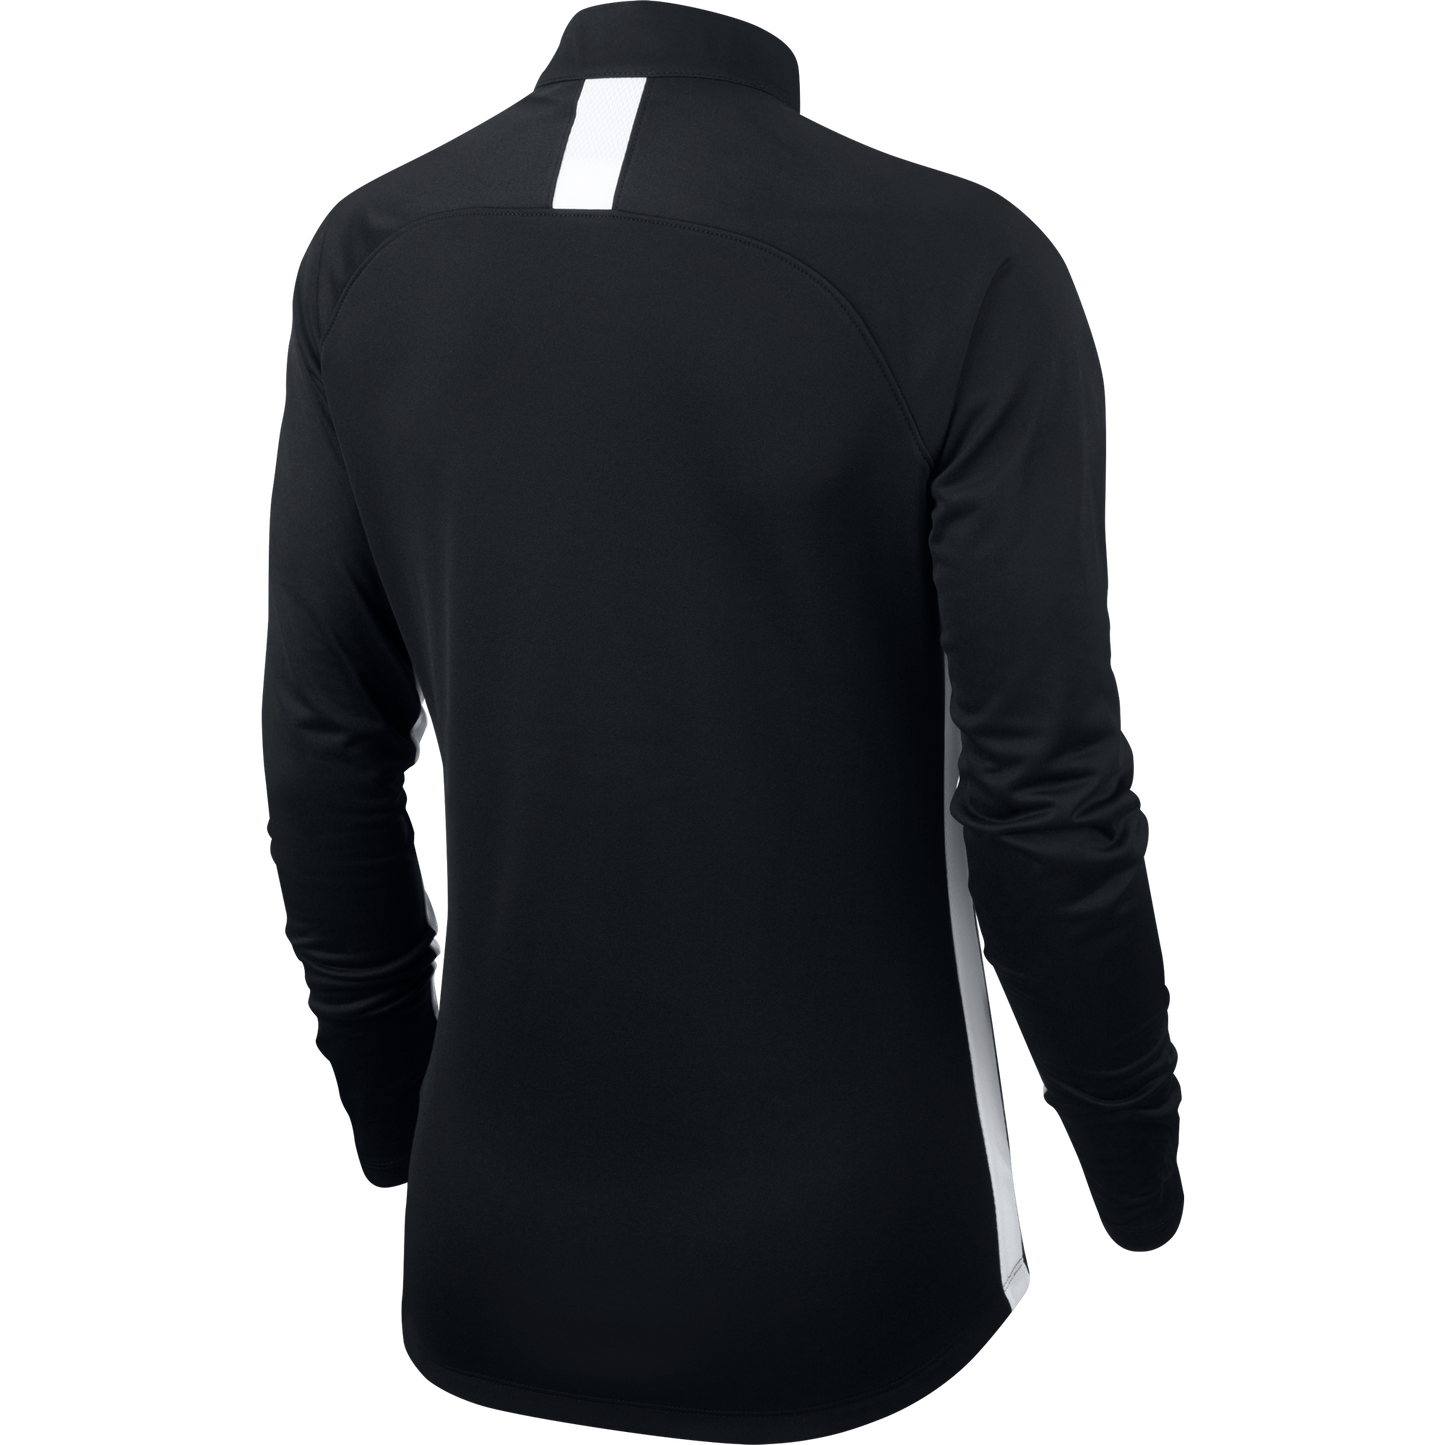 CLEVEDON FC NIKE DRILL TOP - WOMEN'S